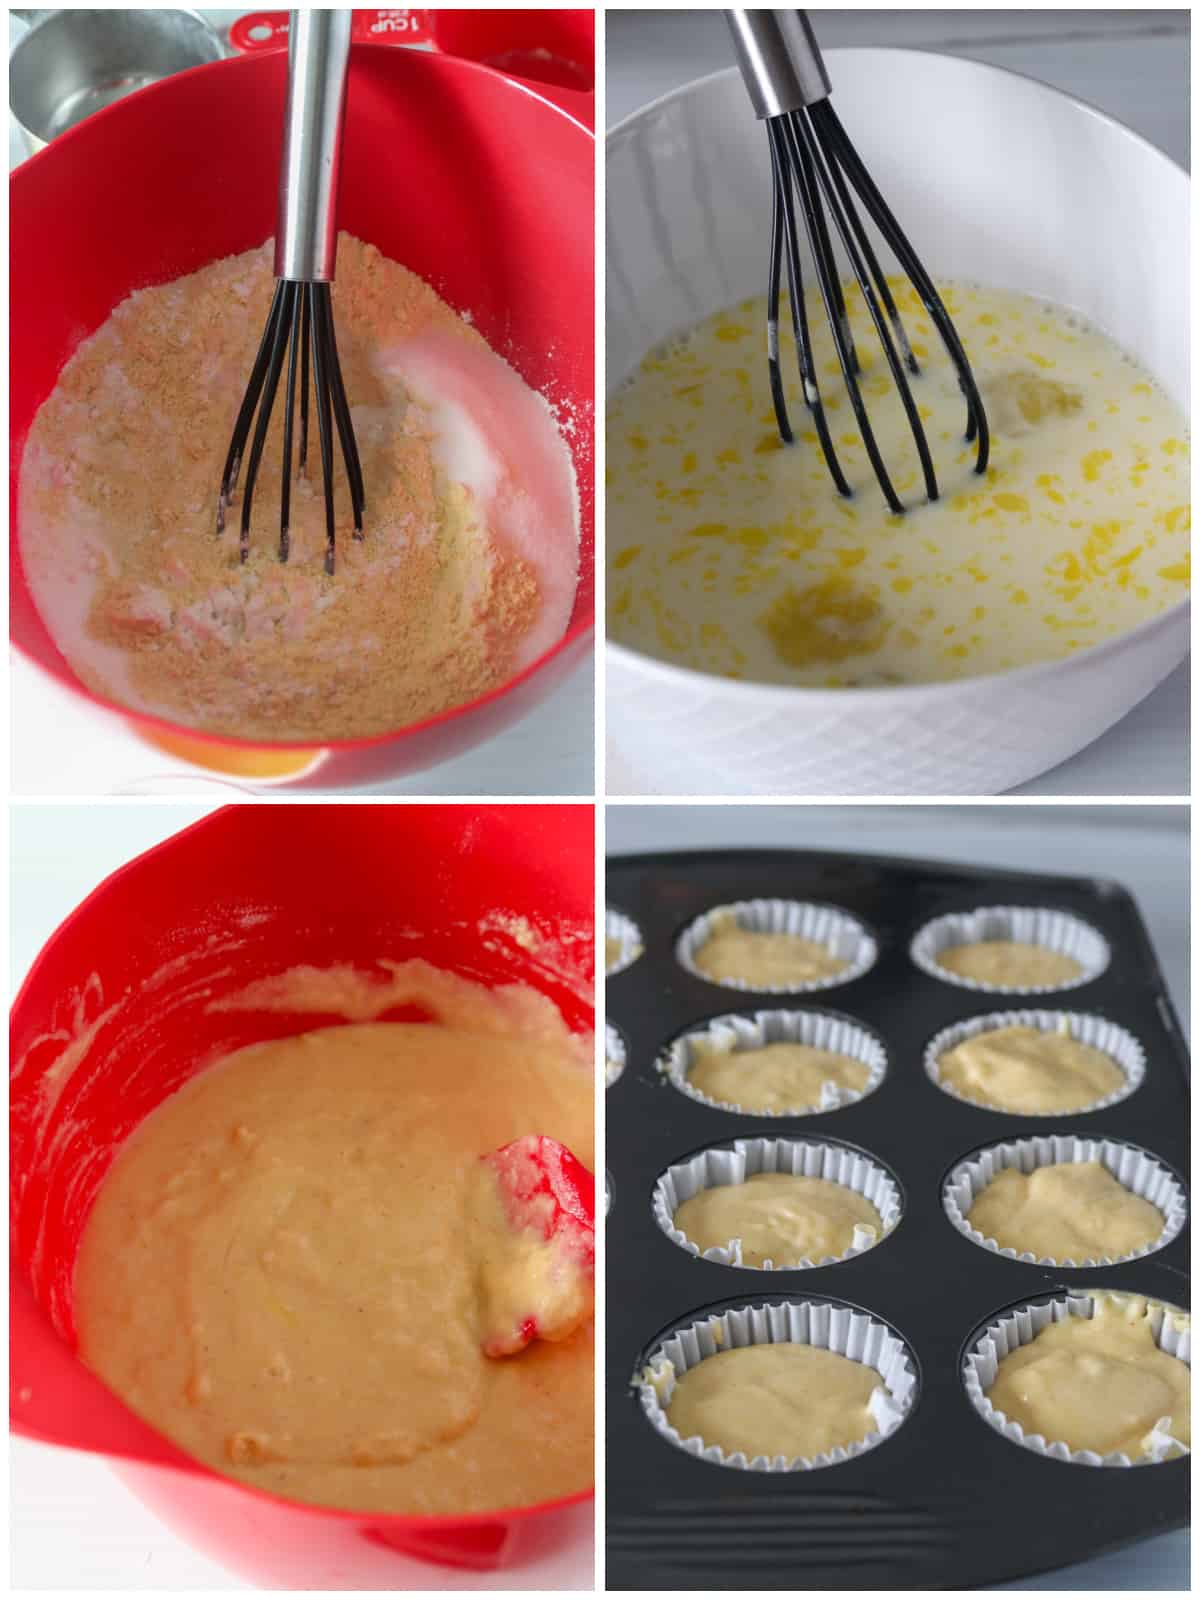 A collage showing the process of mixing the batter of cornbread muffins, with the final photo of the batter spooned and ready in the muffin pan.